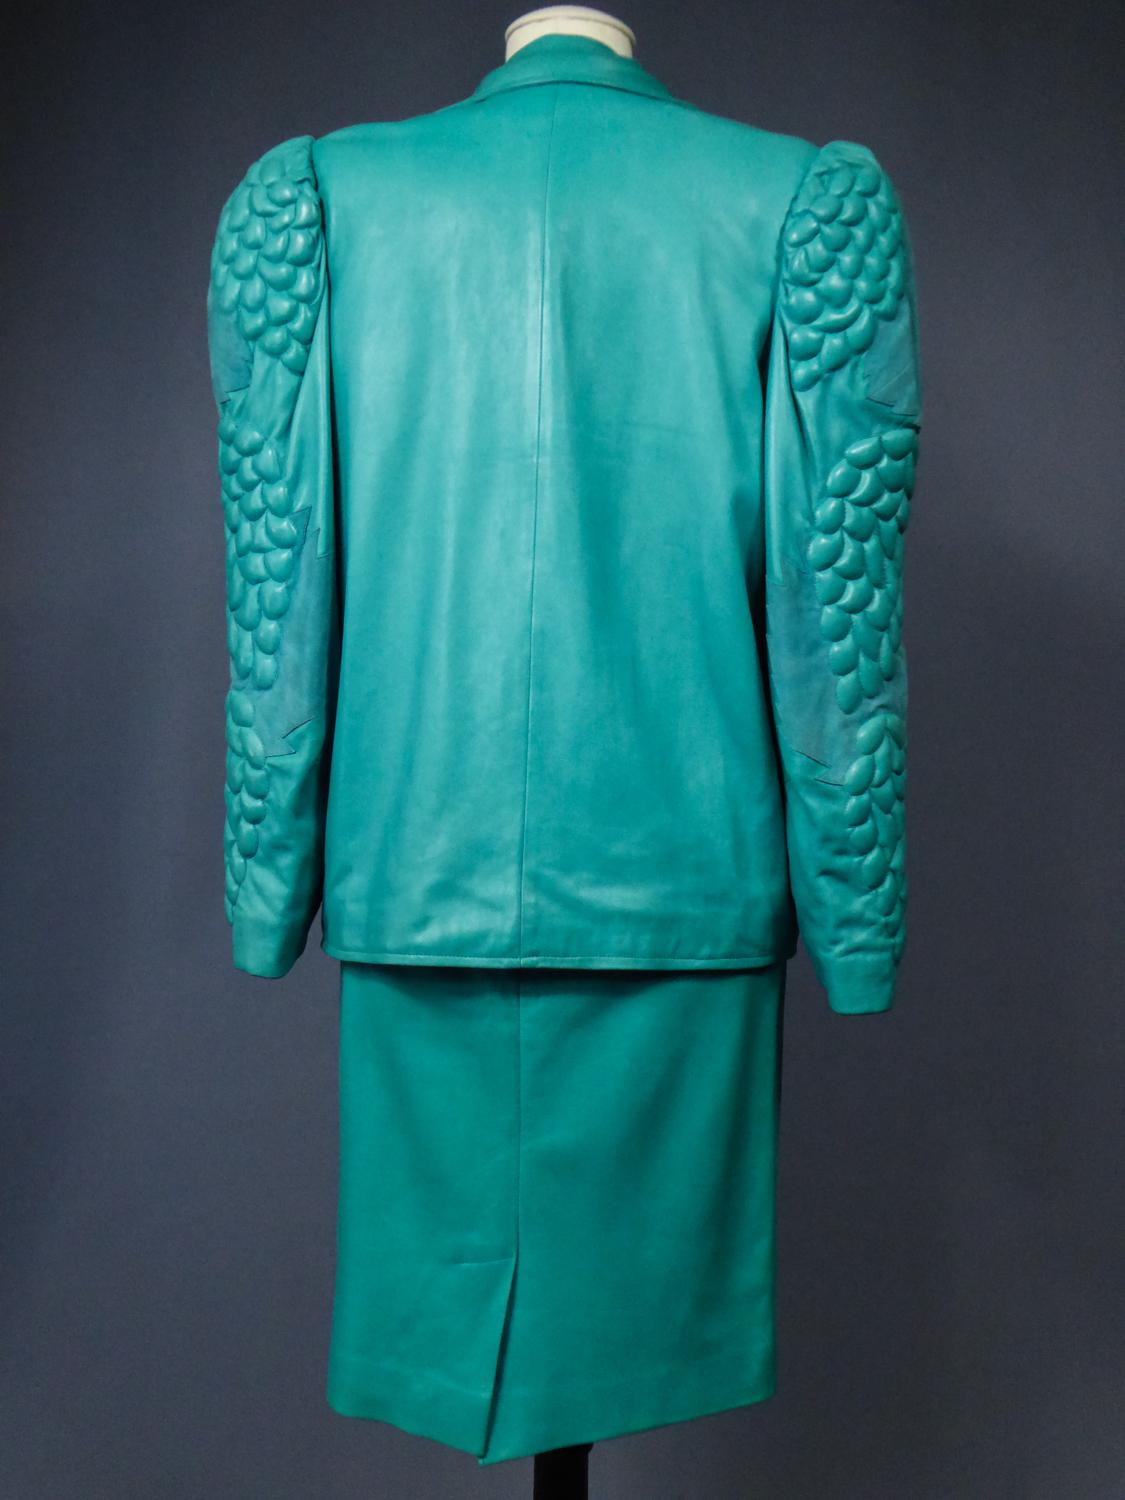 A Jean-Claude Jitrois Skirt and Jacket in Turquoise Leather - Fall 1985/1986  For Sale 7